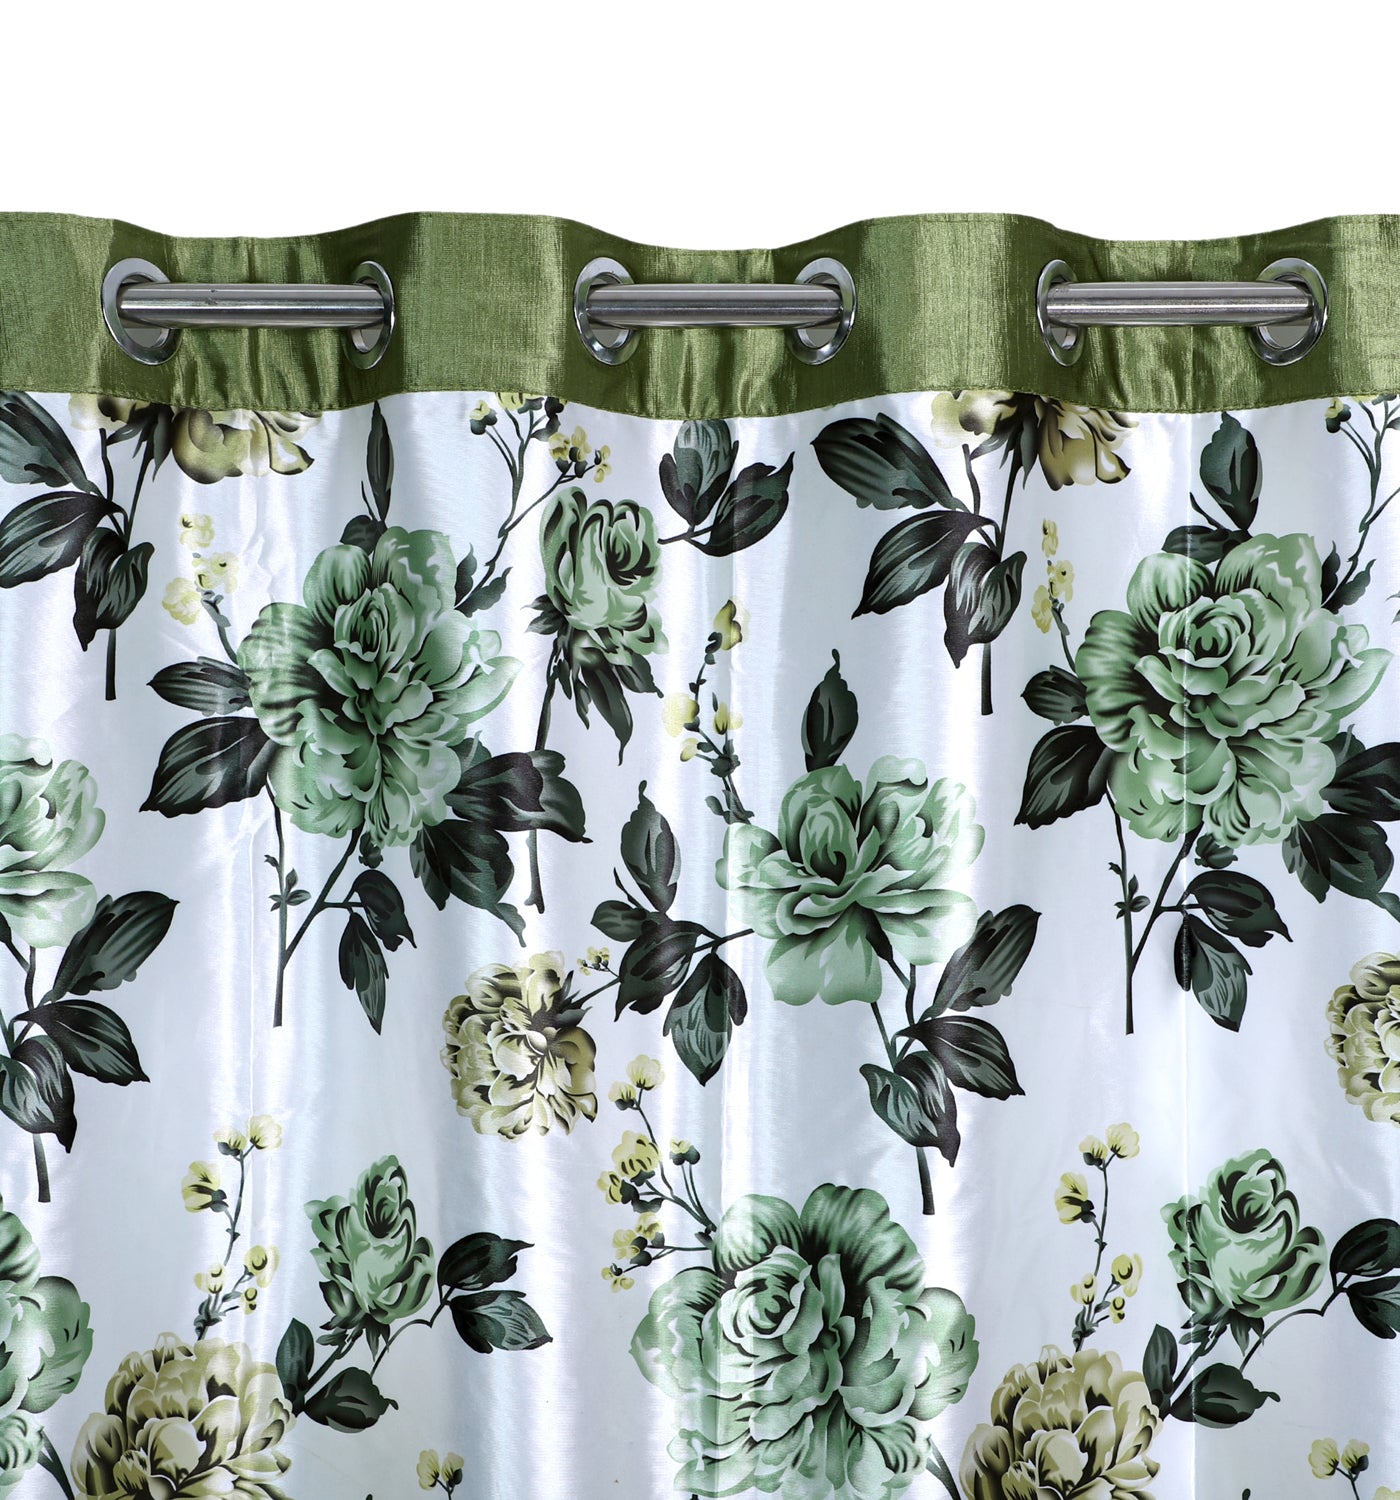 Swiss Magnolia Printed Curtain - Green (Pack of 1)